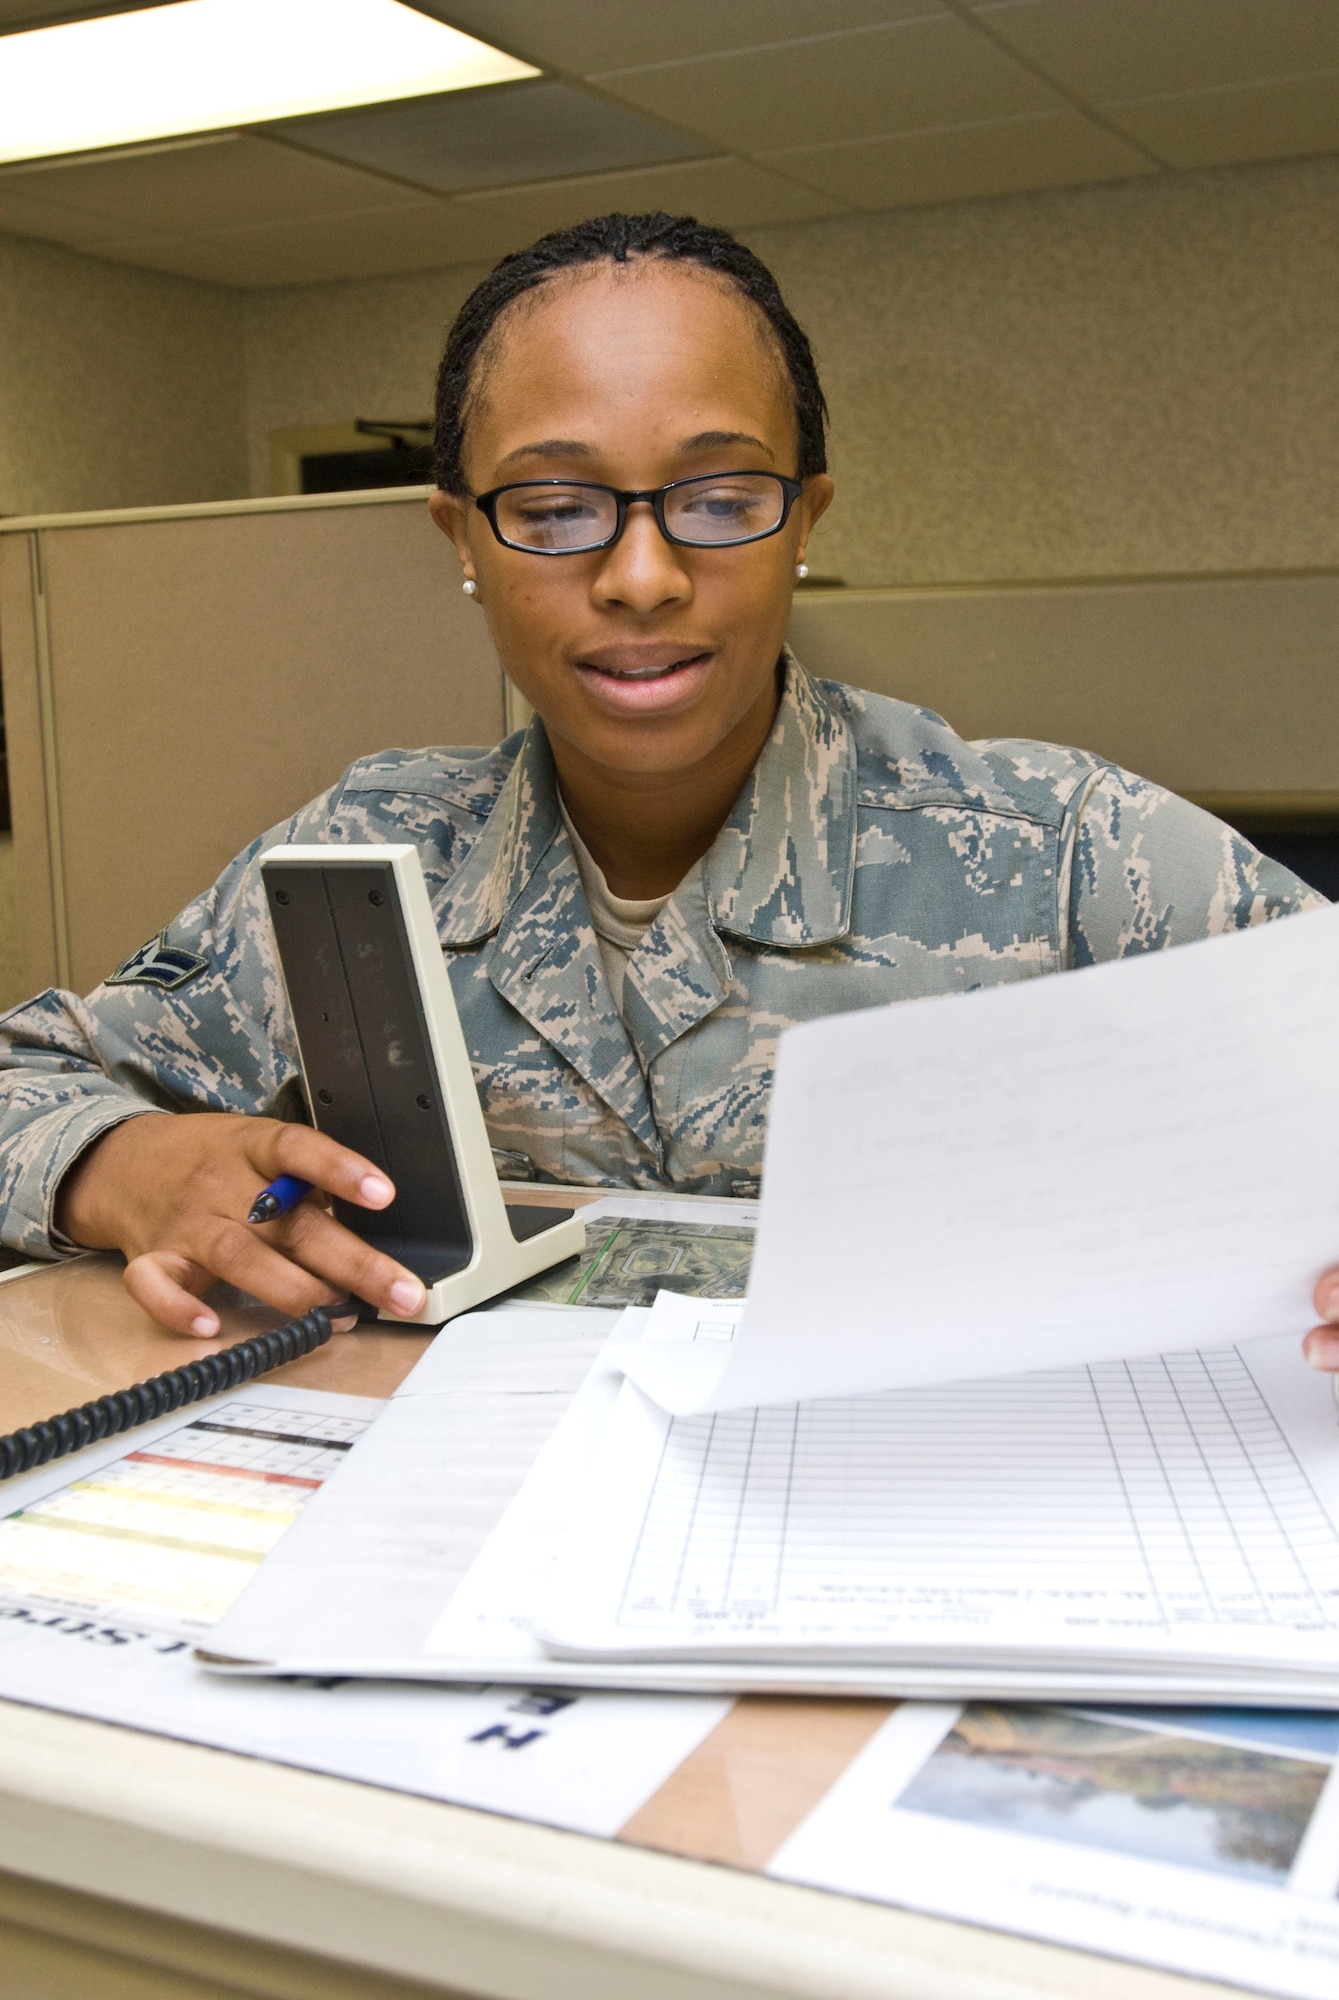 Airman 1st Class Dezarae Herring, 19th Civil Engineer Squadron production control specialist, radios in a work order to her coworkers Sept. 24 here. Airman Herring was selected to receive the Chiefs Sharp Troop award for her job performance and volunteer efforts. She managed the squadron’s $500,000 cell phone account and filled the duties of shop safety representative and alternate facility manager. Airman Herring also volunteered her time during the Riverfest festival in Little Rock, strengthening bonds between the base and local community. (U.S. Air Force photo by Staff Sgt. Nestor Cruz)